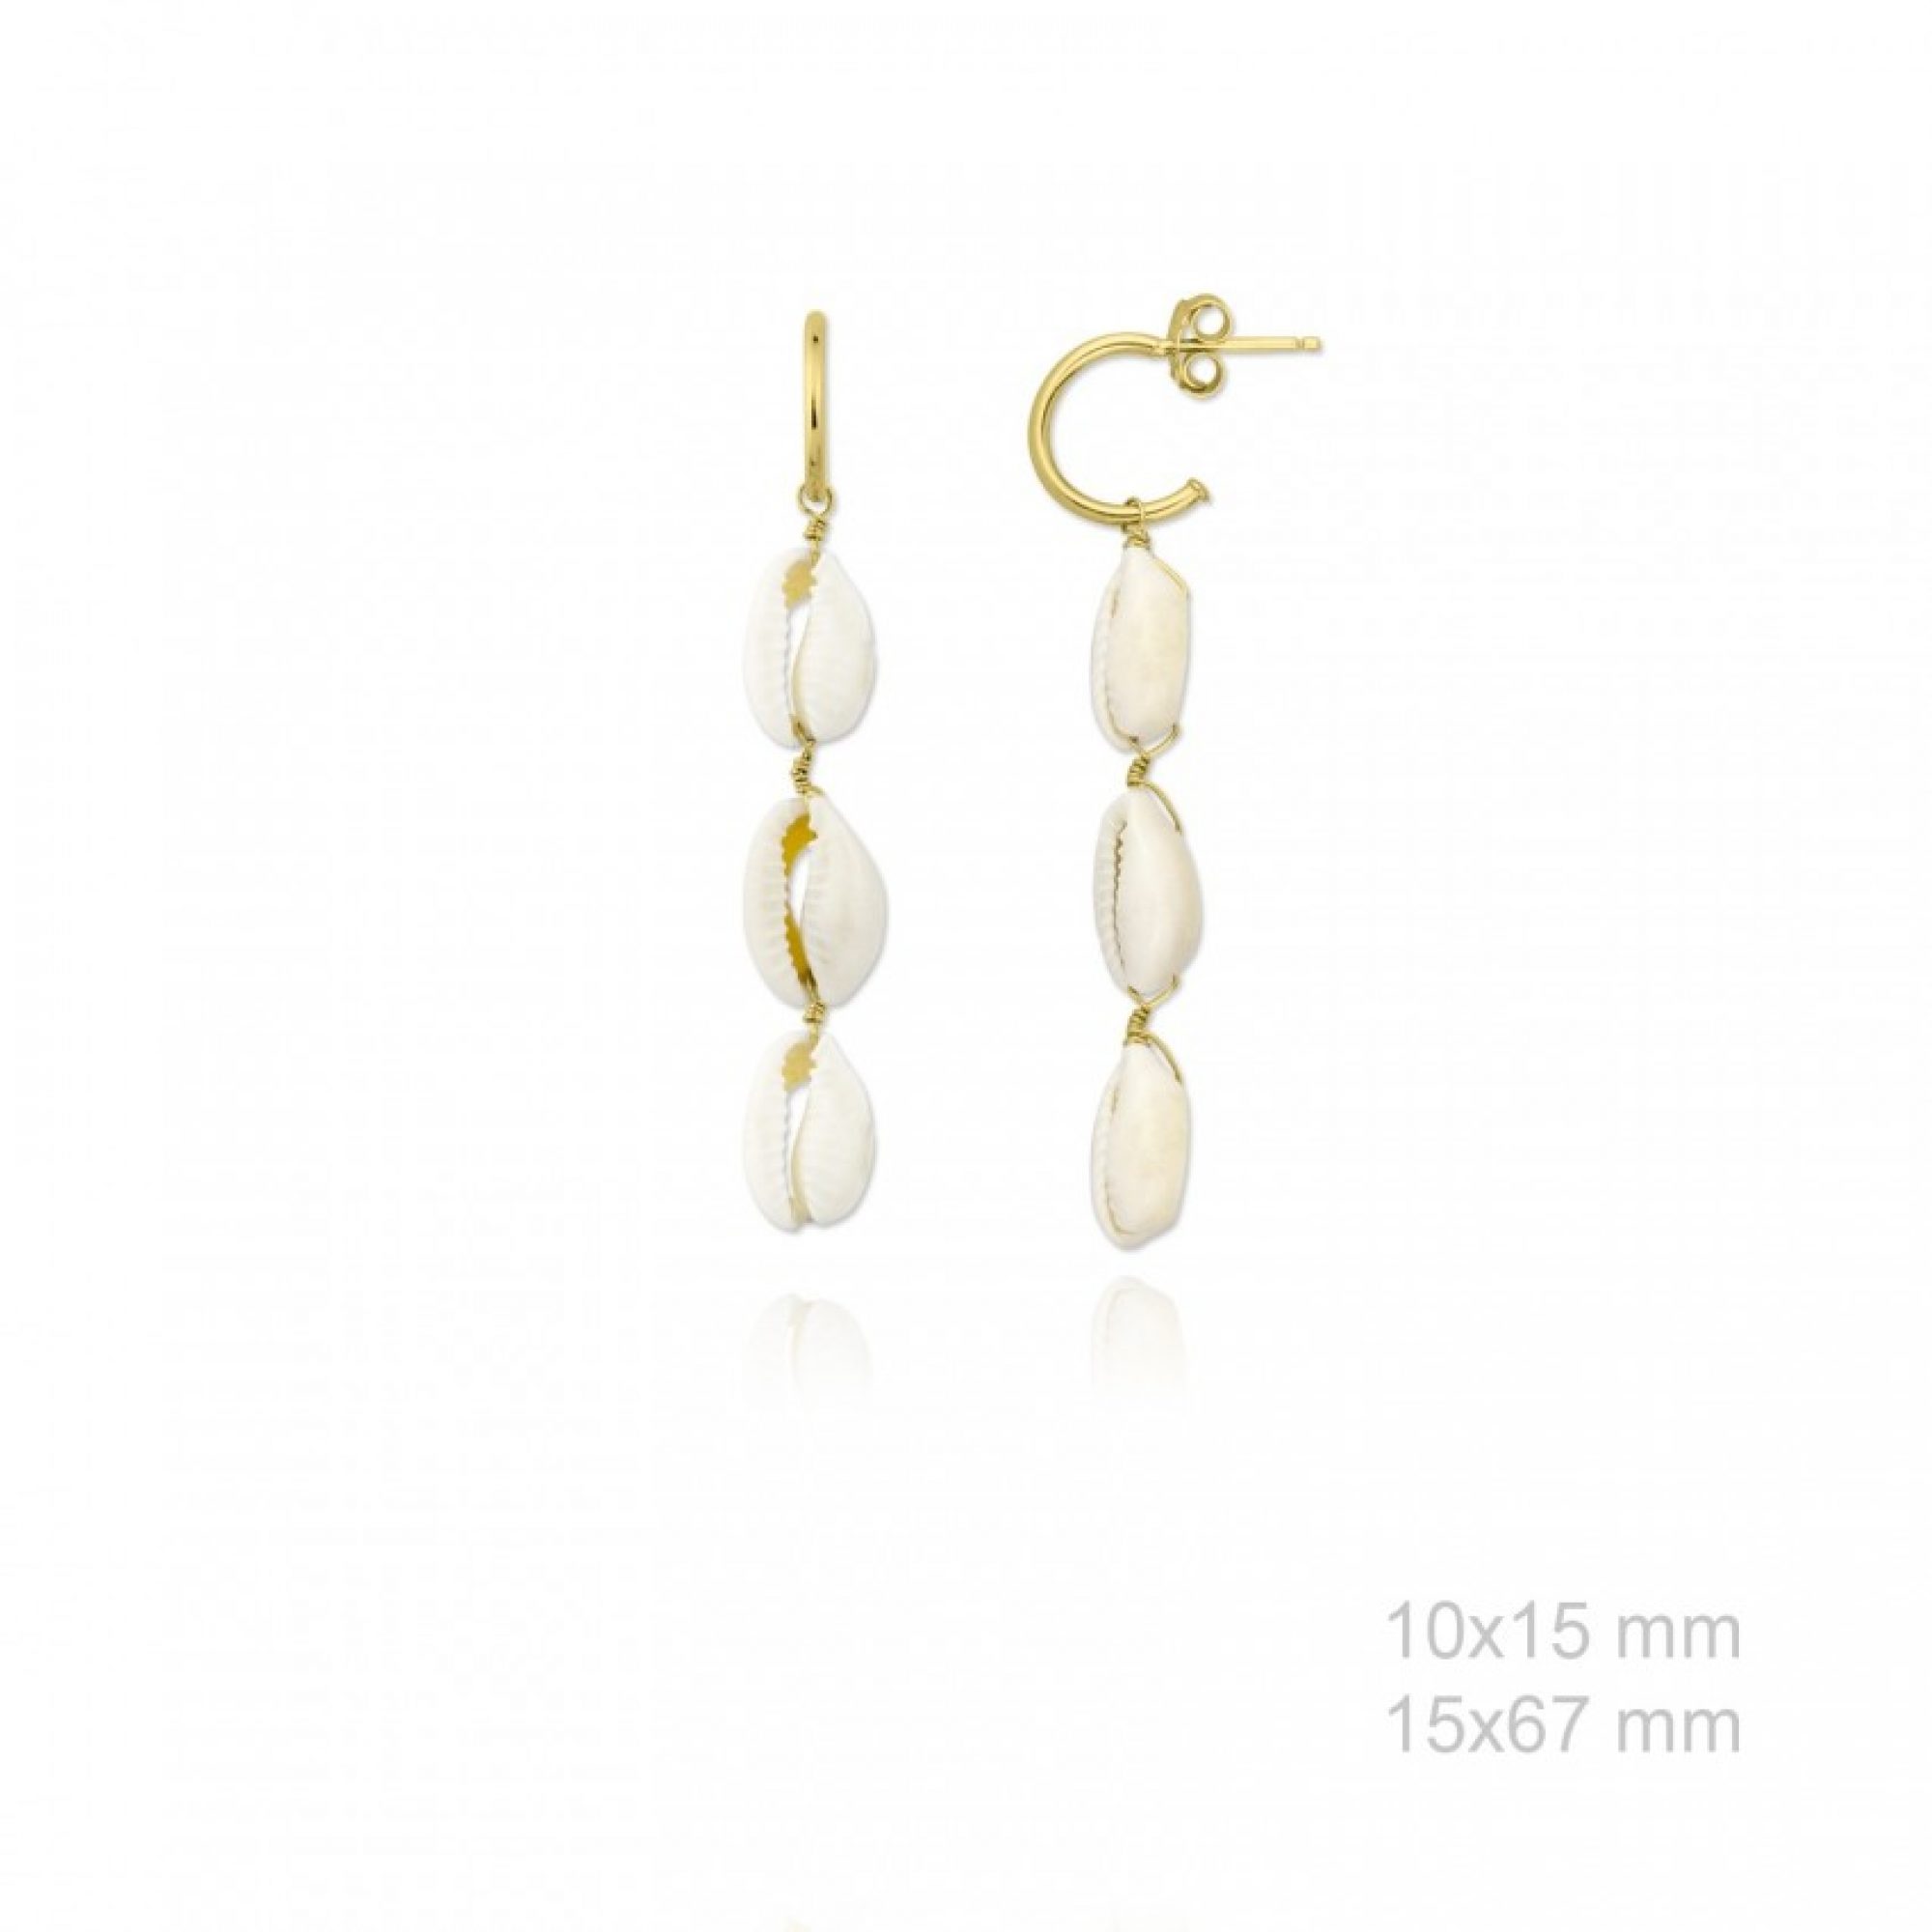 Gold plated earrings with seashells